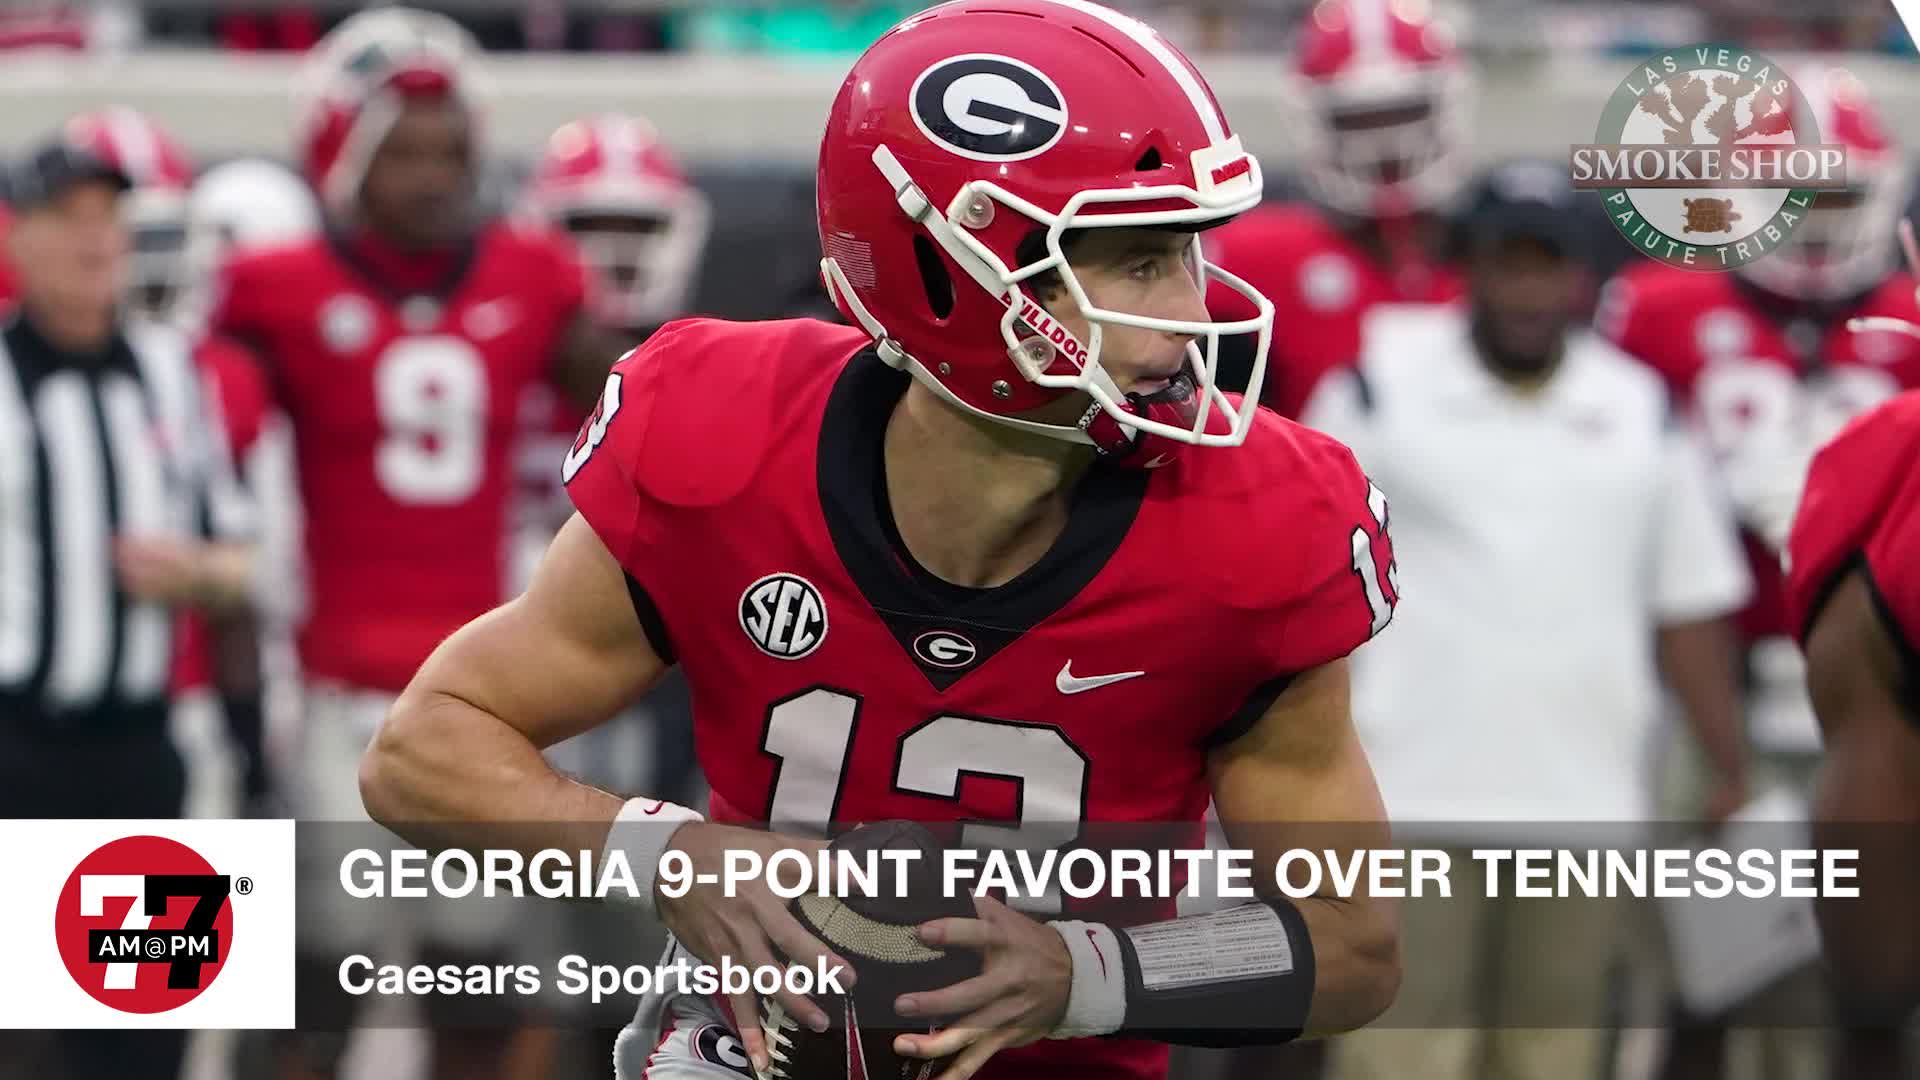 Georgia 9-point favorite over Tennessee